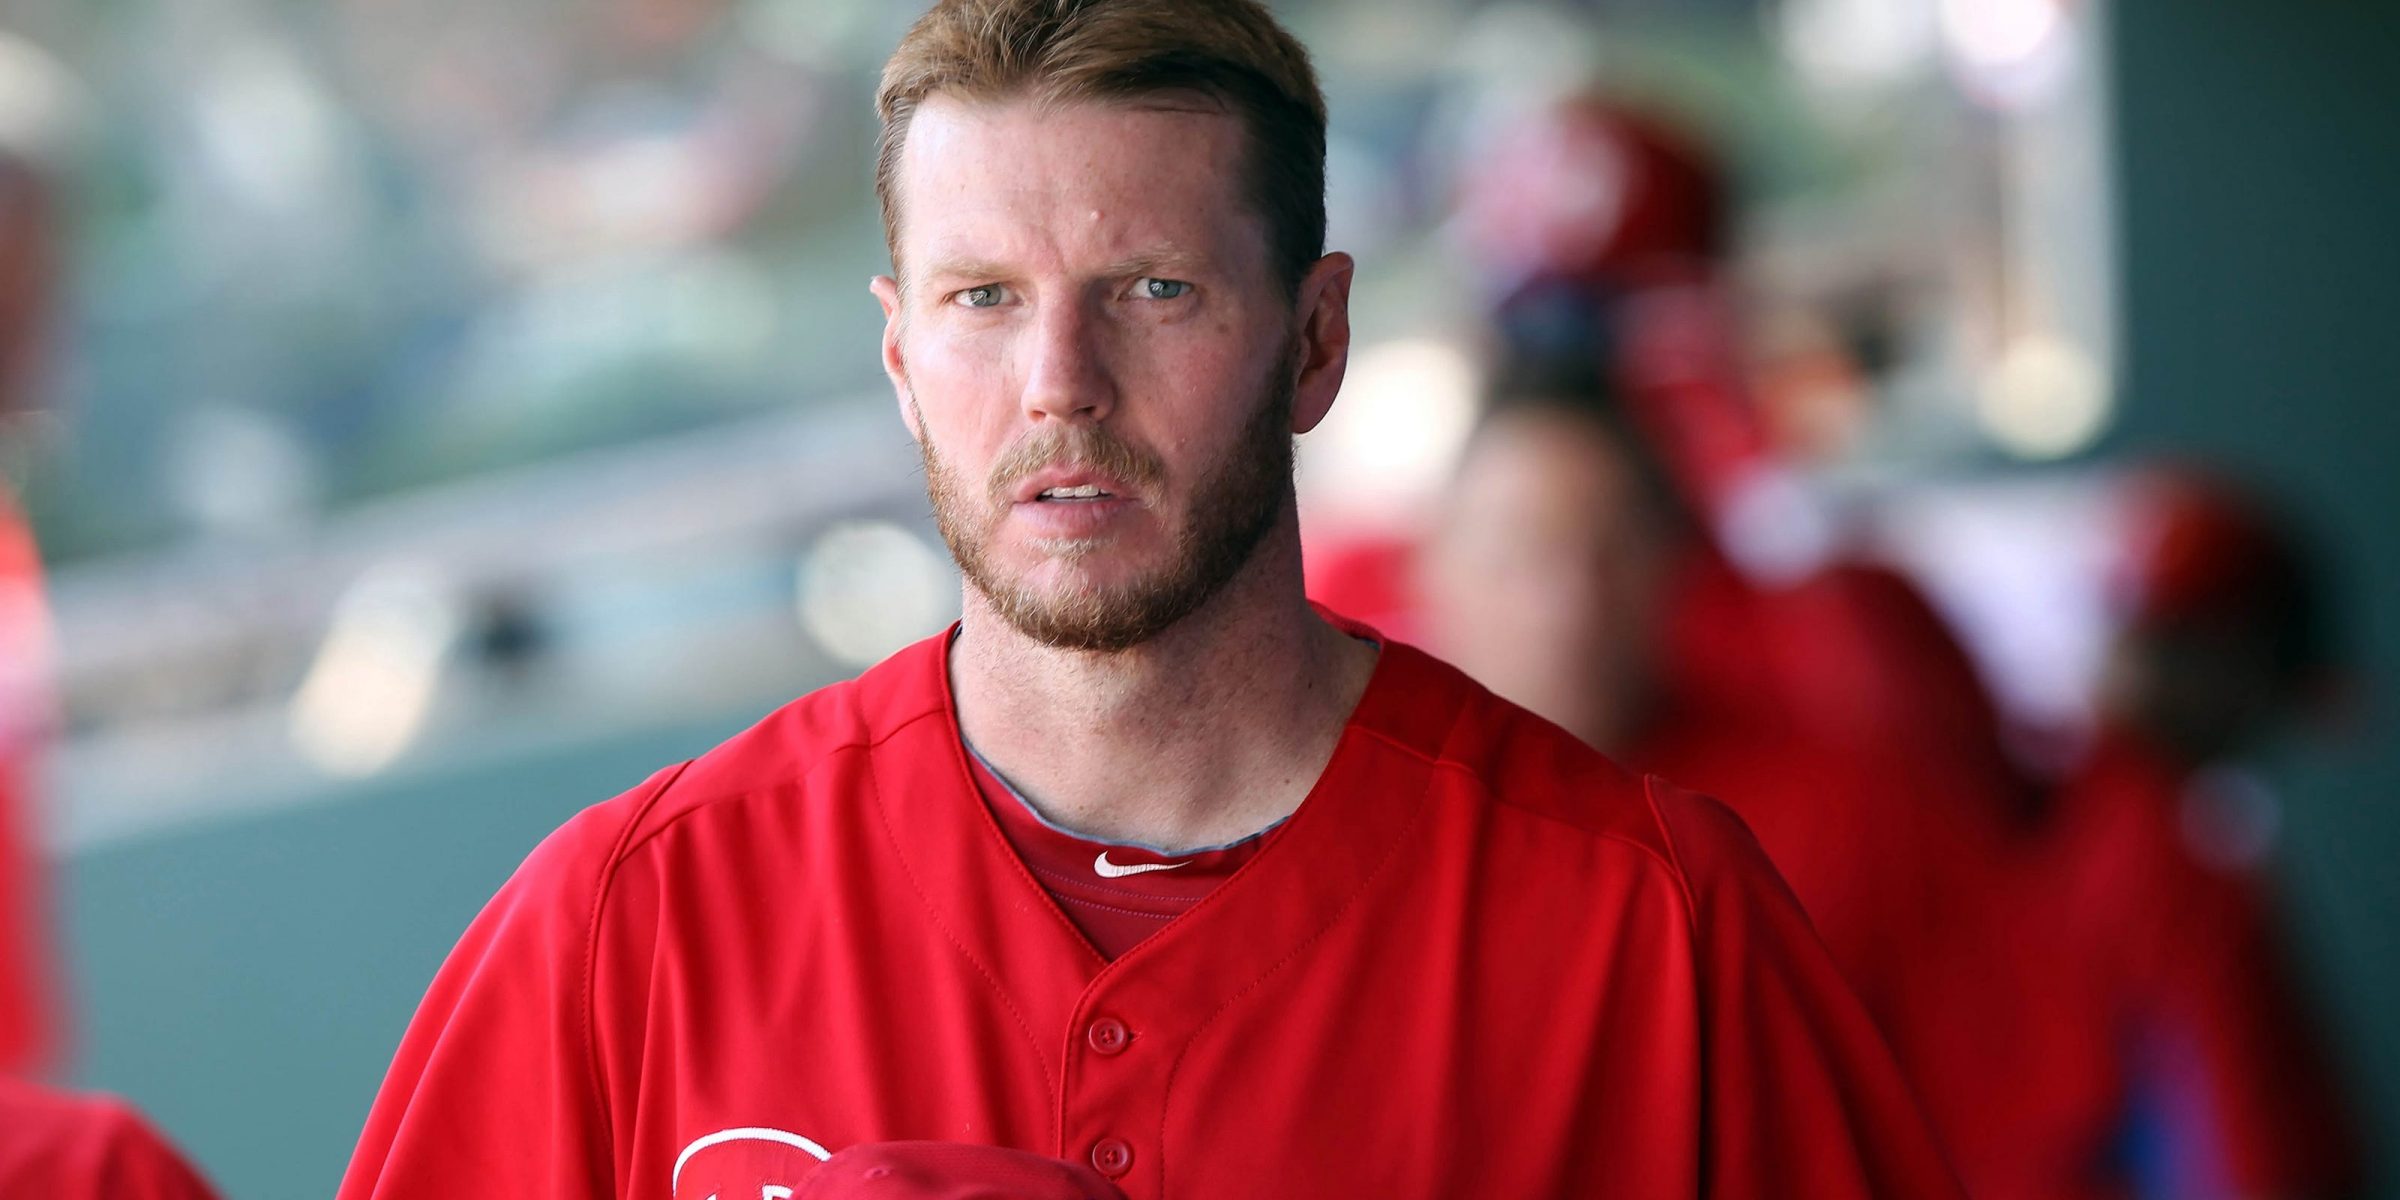 Roy Halladay’s drug addiction exposed in ESPN documentary 'Imperfect: The Roy Halladay Story'